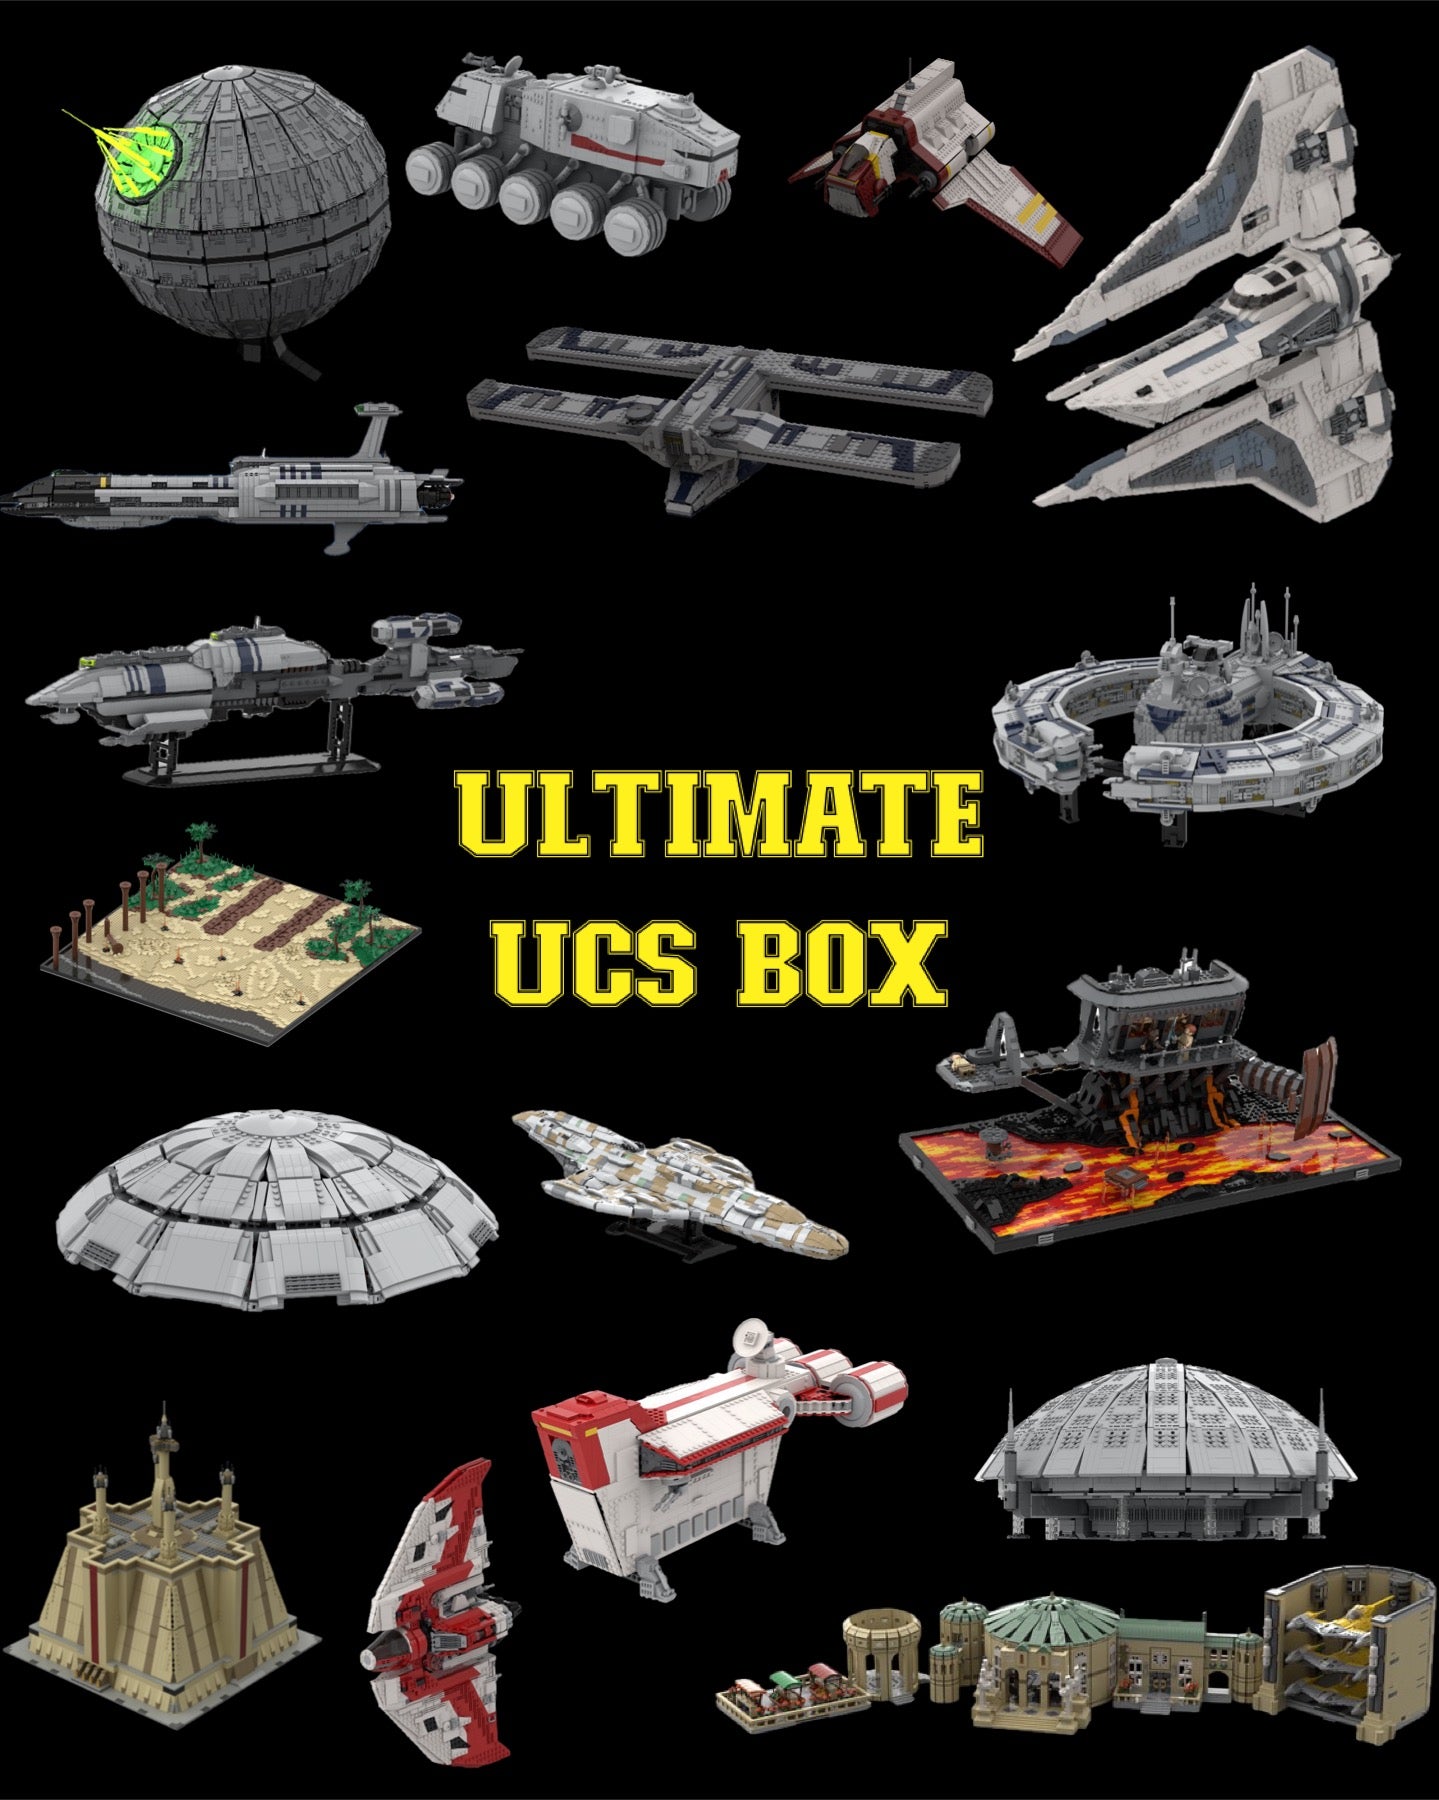 THE ULTIMATE UCS BOX - NOTHING UNDER $300!! INCREDIBLE!